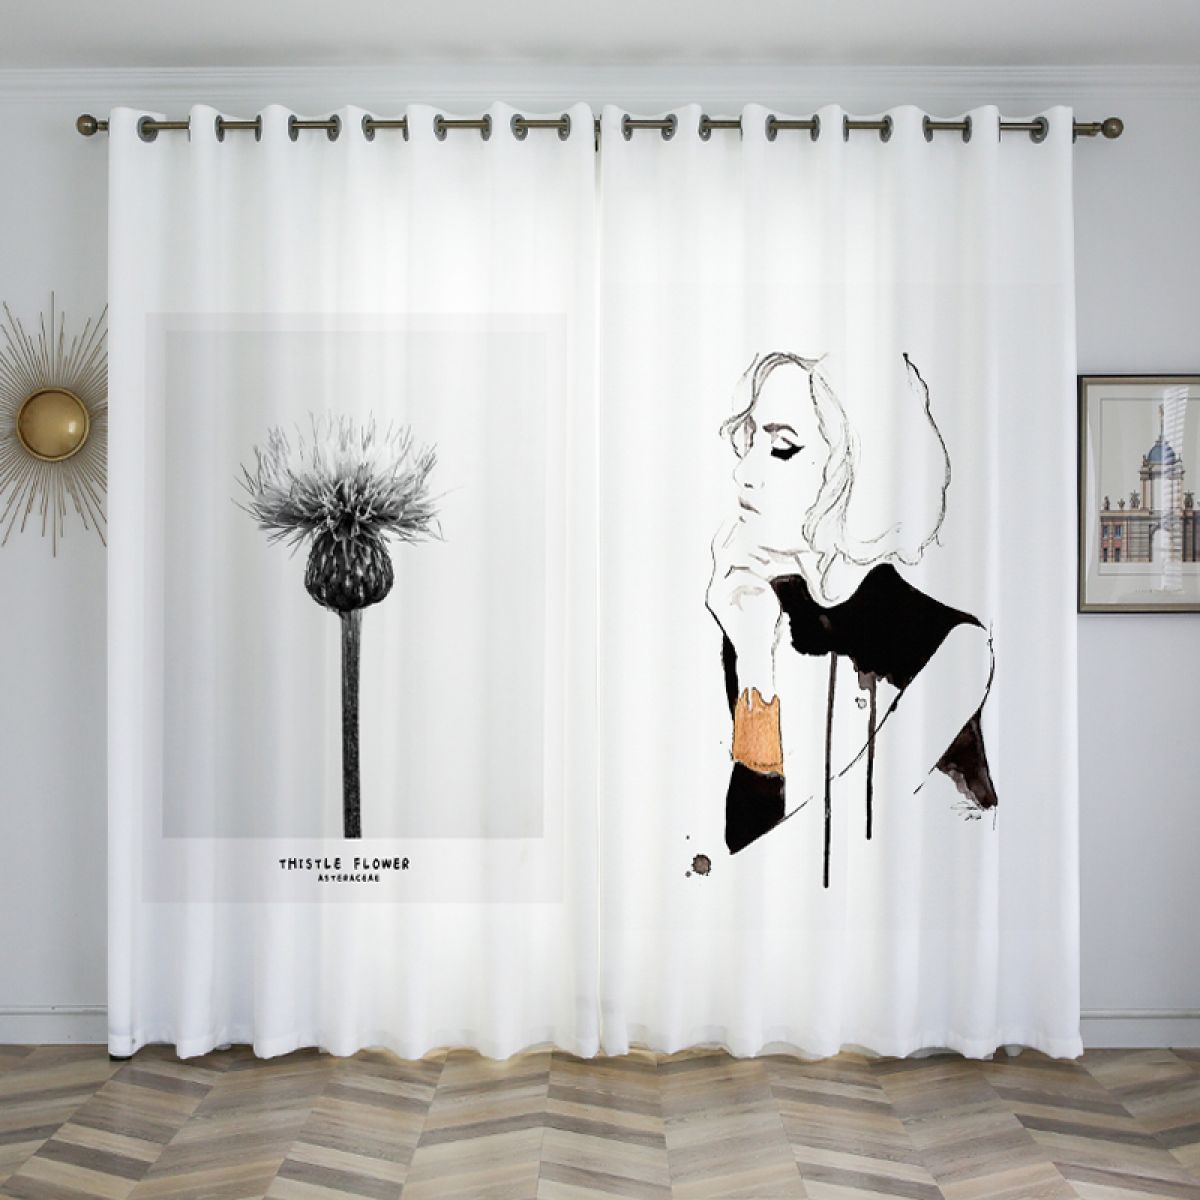 Thistle Flower Woman Printed Window Curtain Home Decor